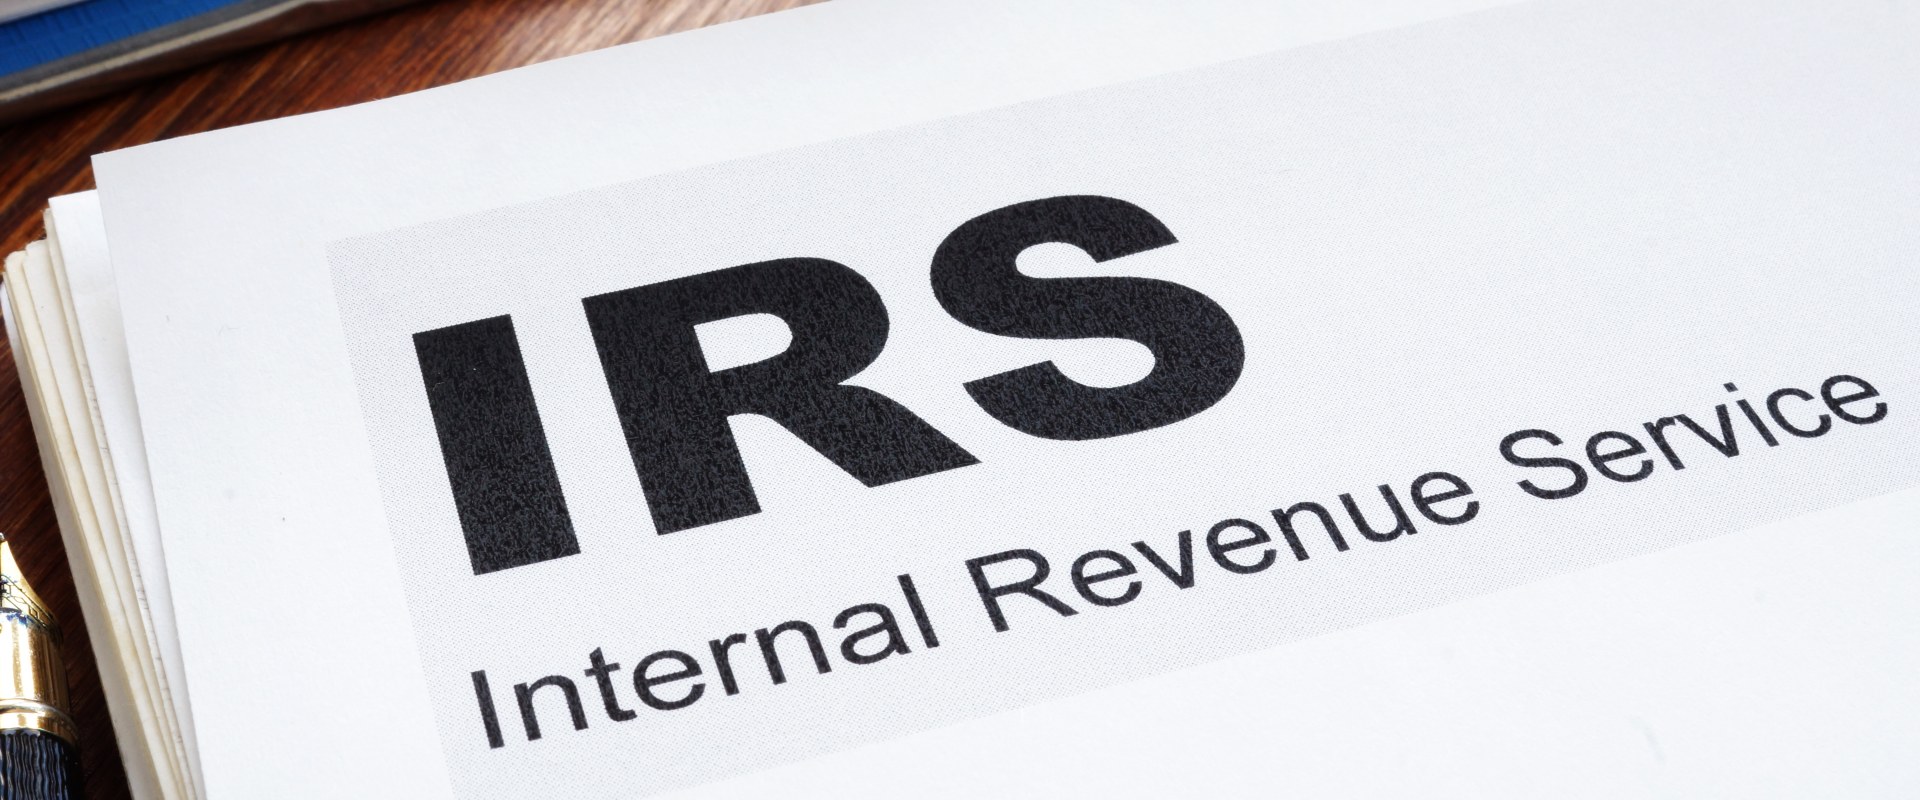 What do codes mean on IRS transcript?